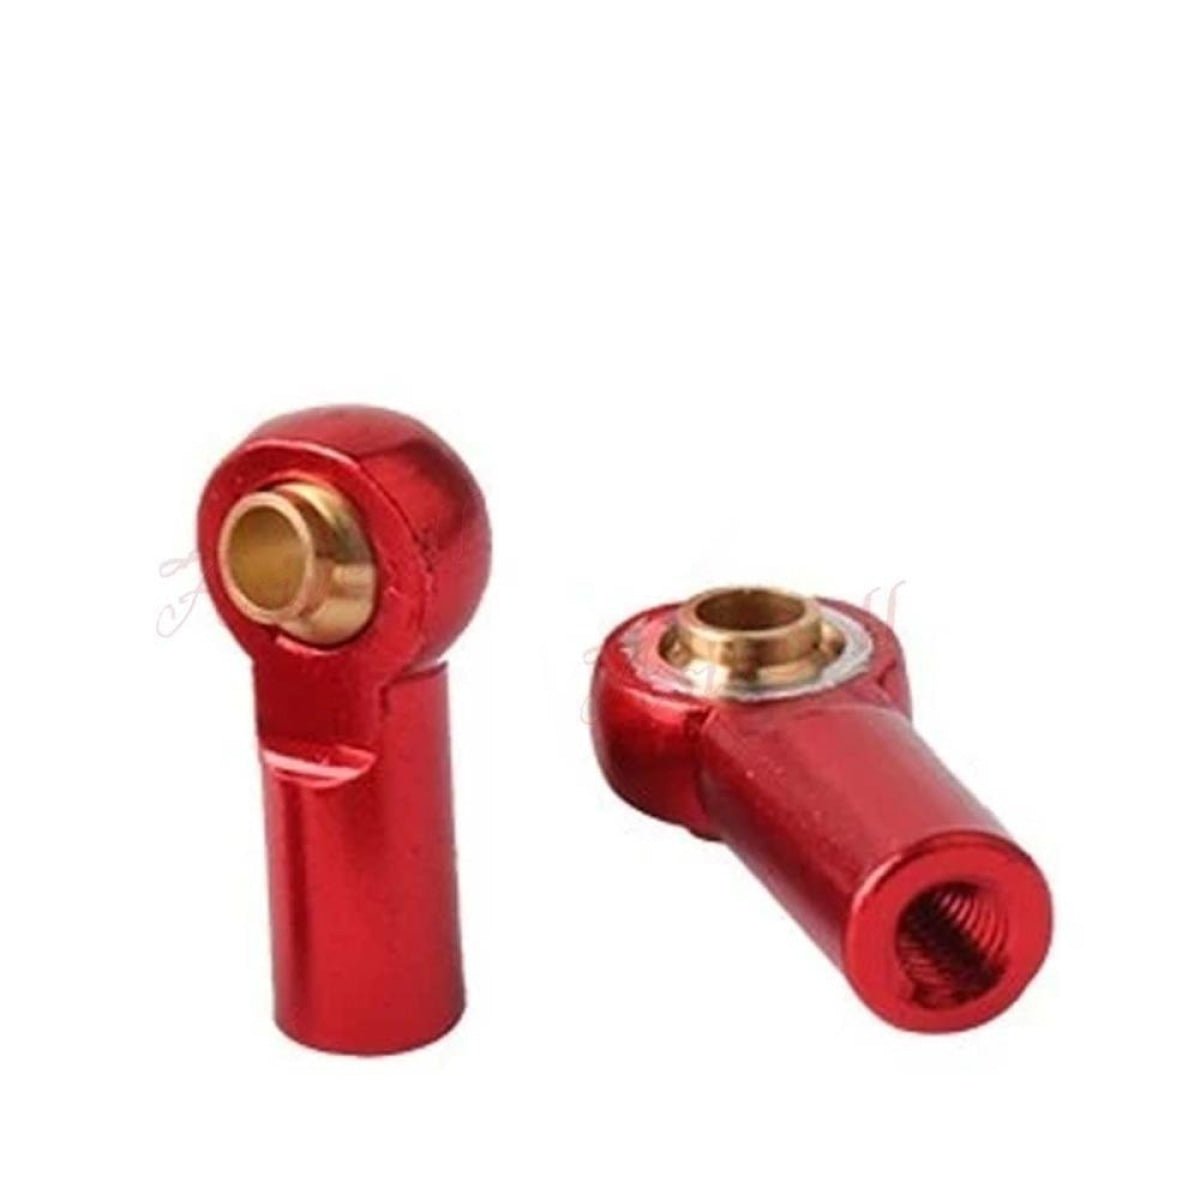 2pcs M3 Ball Head Aluminium Link End Holder Tie Rod - M3 Red - - Asia Sell